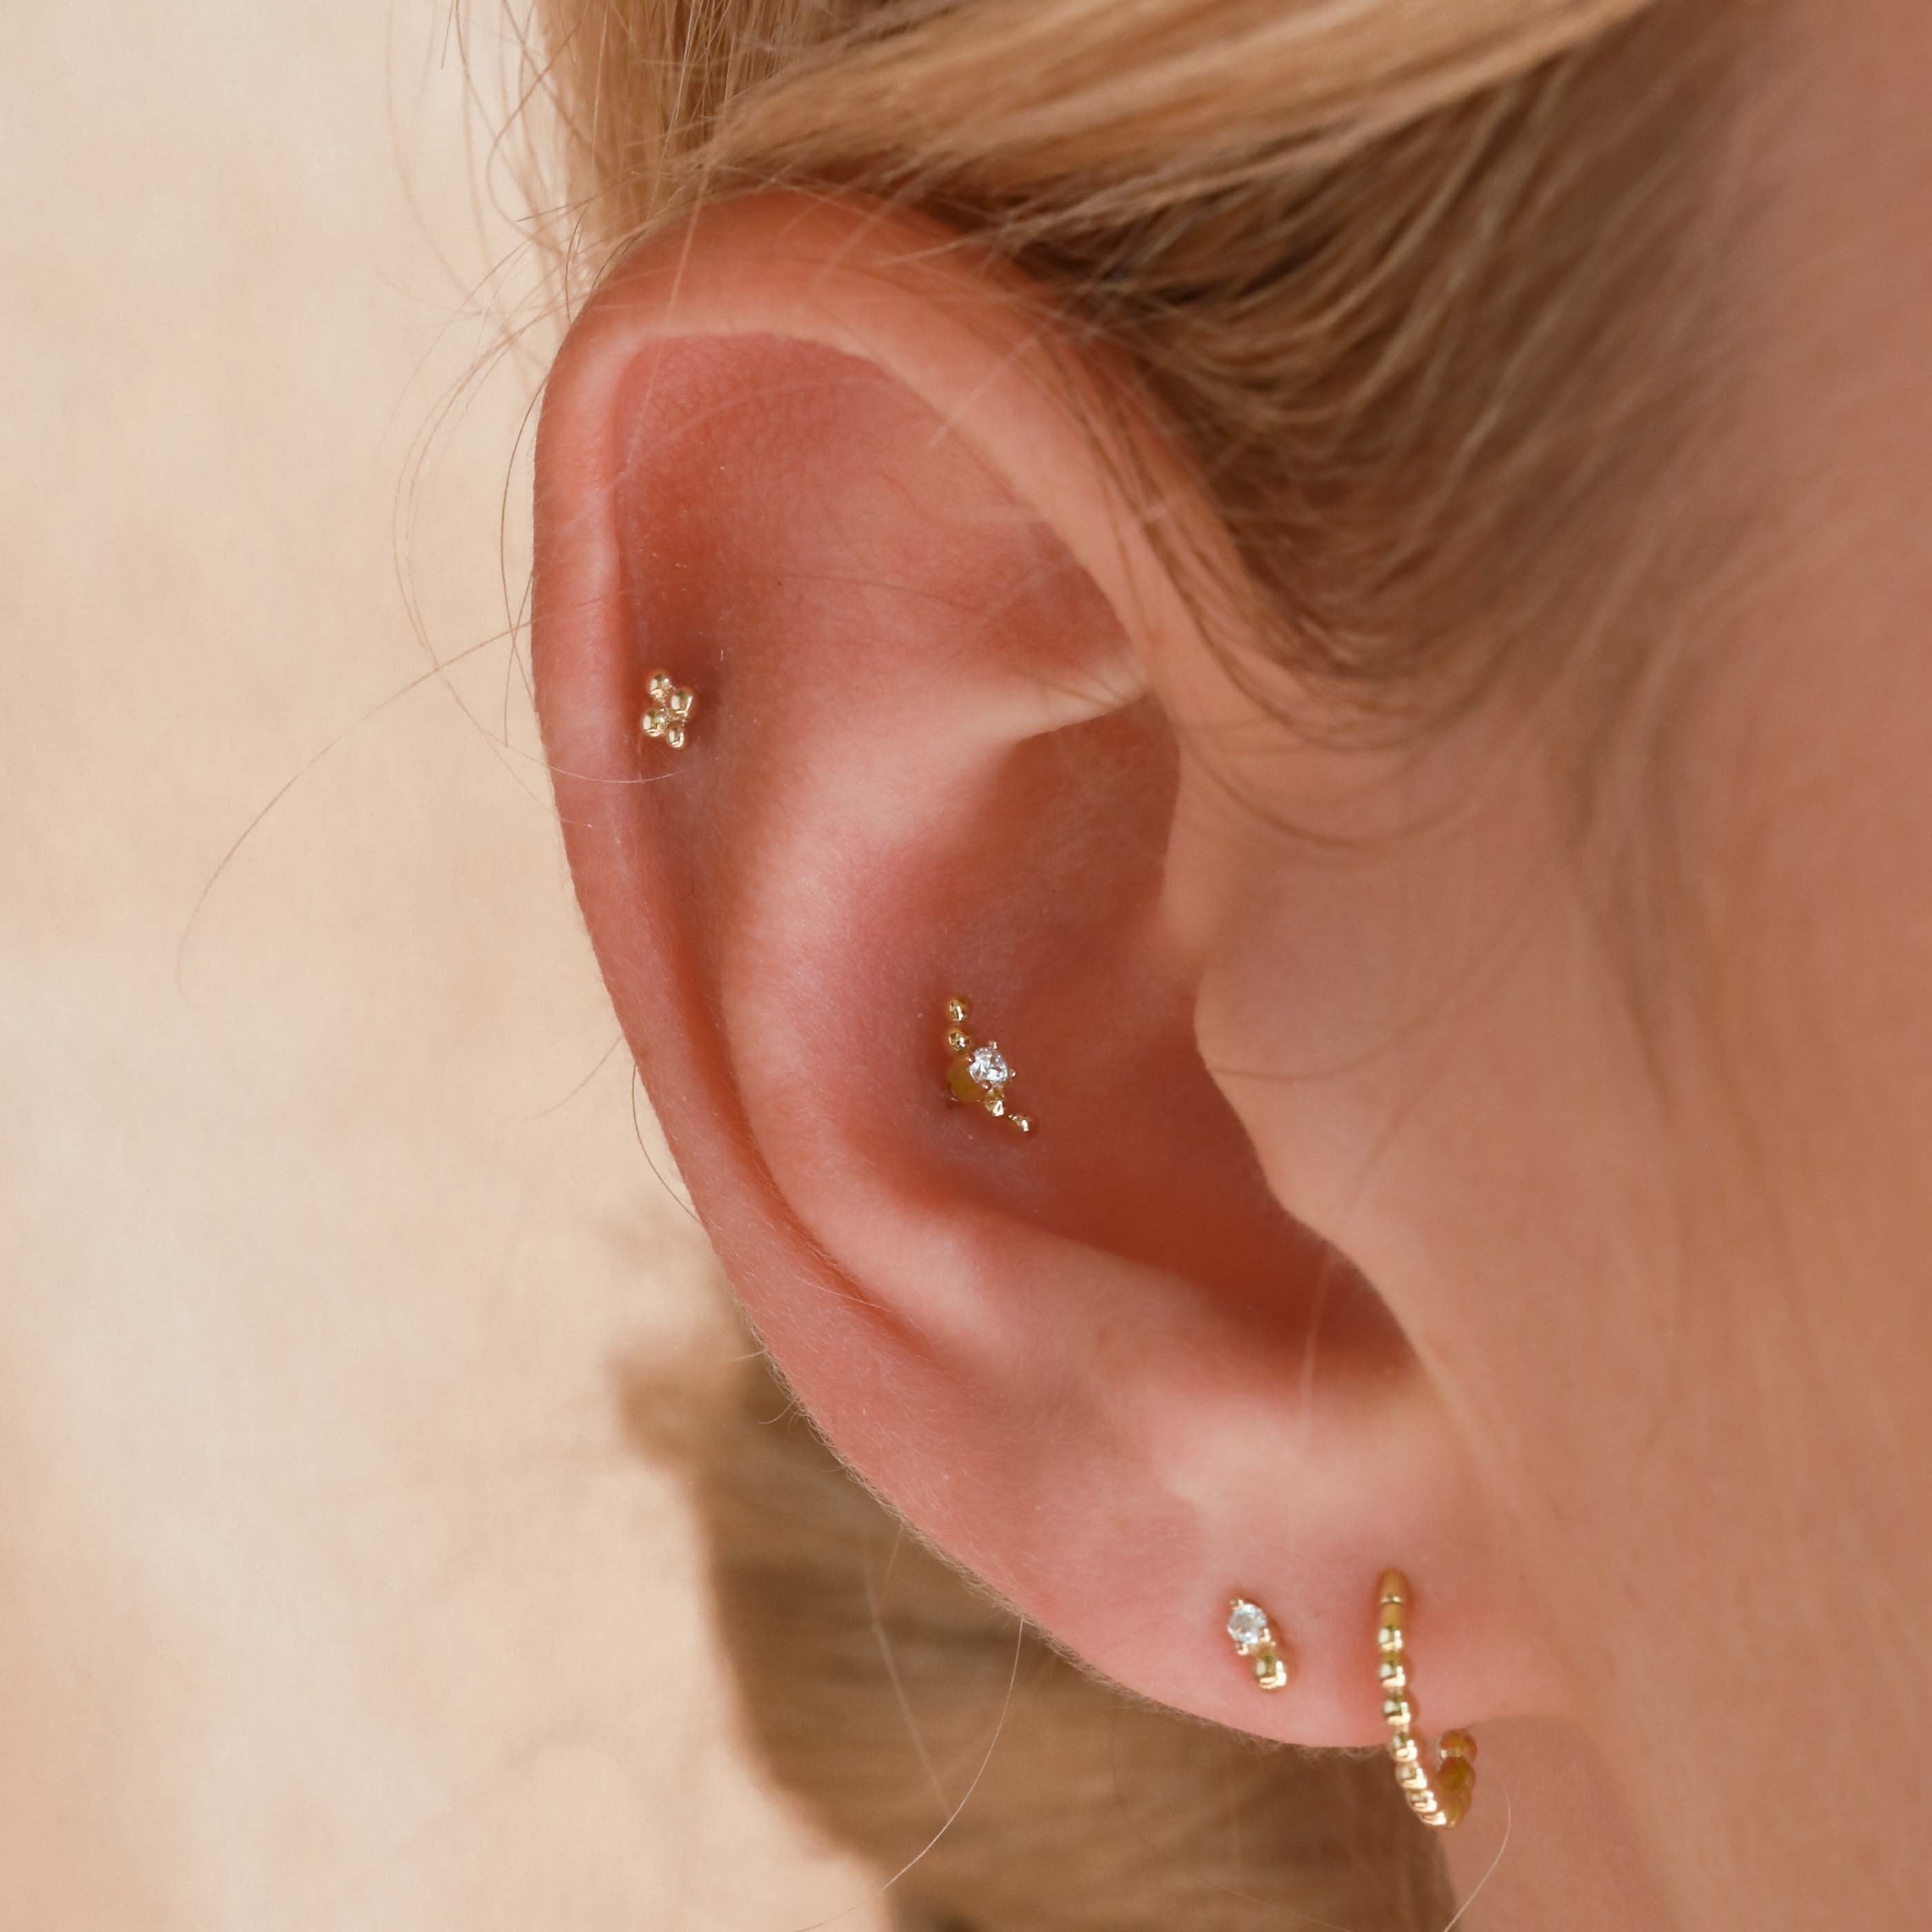 Beaded Curved Piercing Stud in Solid Gold